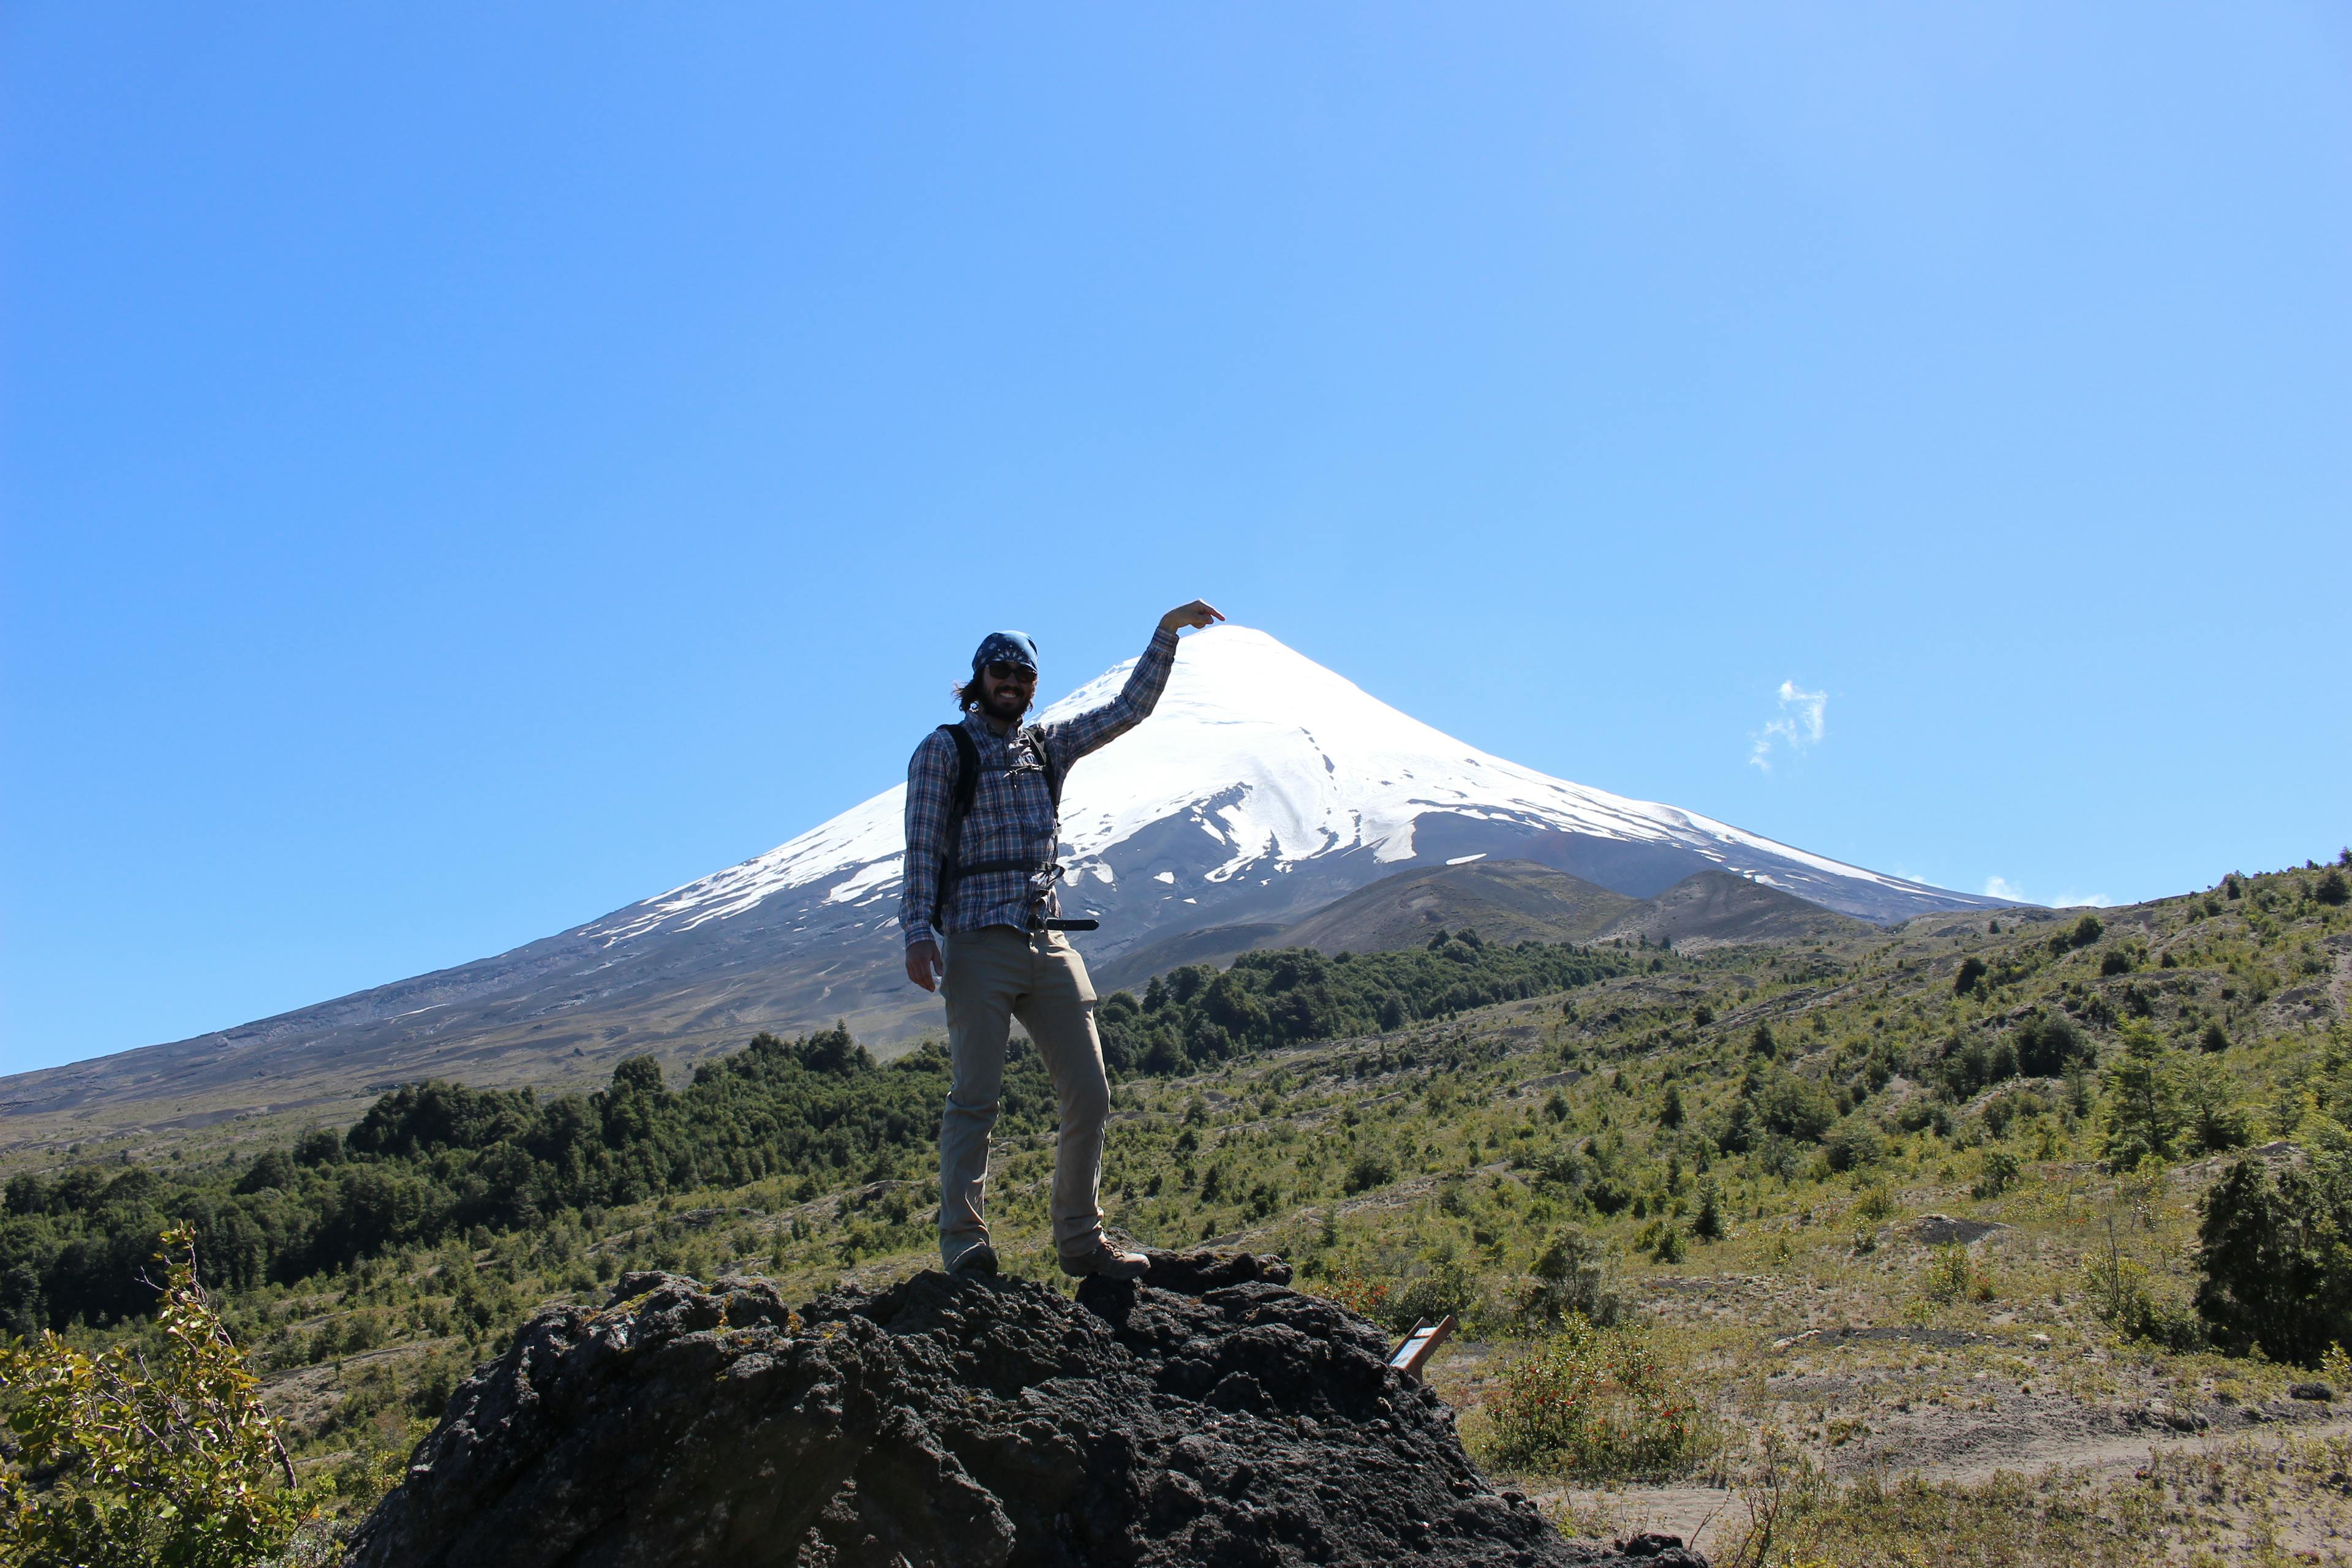 Gerrod touching the top of Volcán Osorno